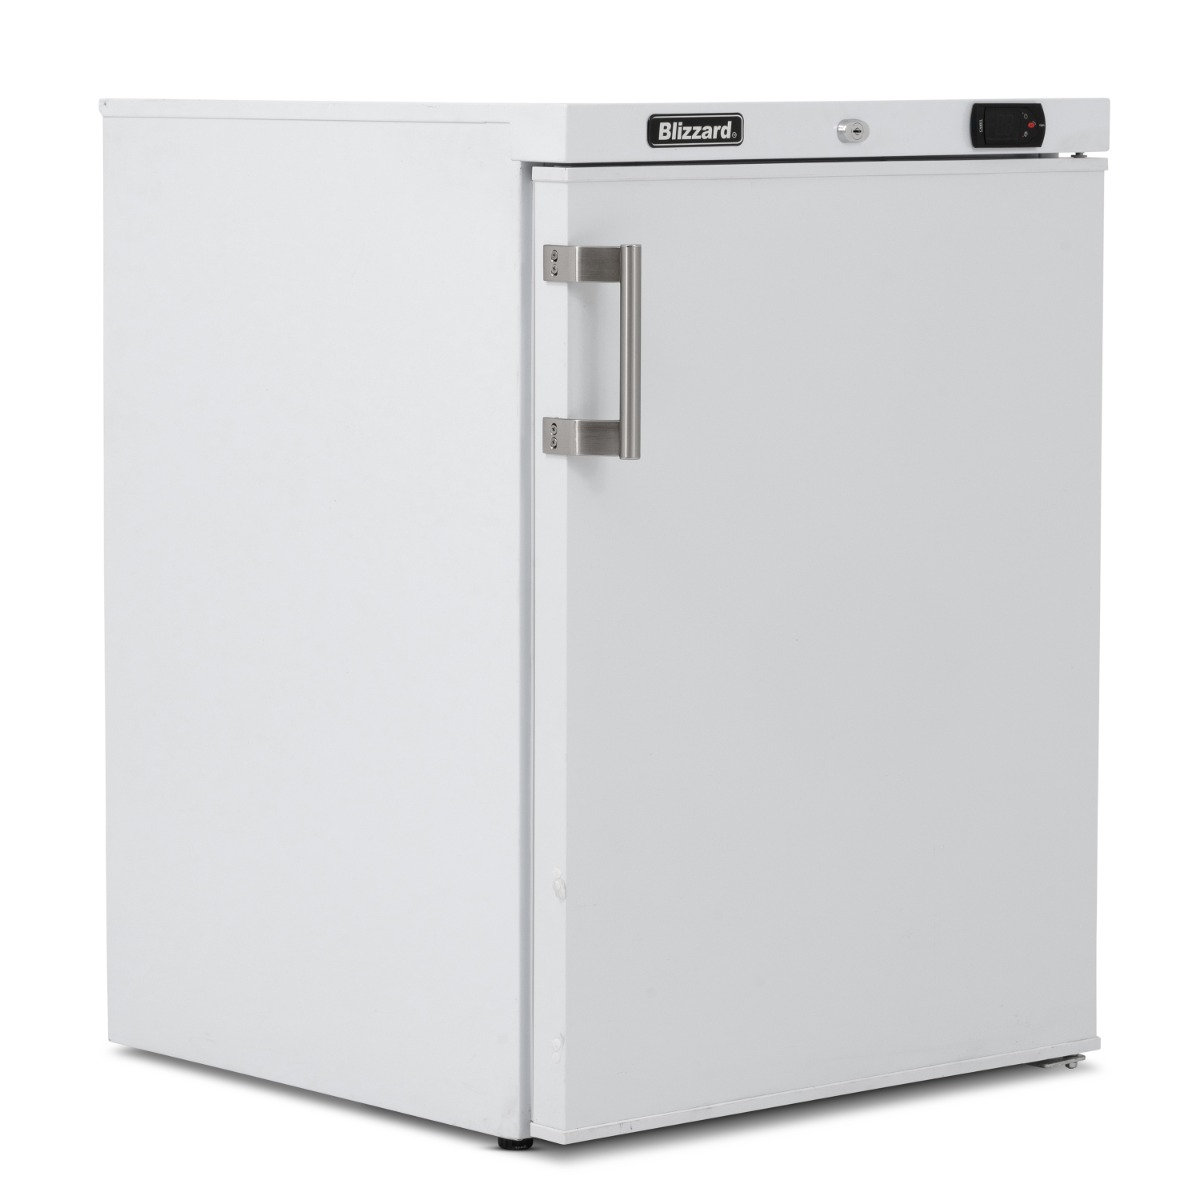 BLIZZARD Under Counter White Laminated Refrigerator 145L - UCR140WH